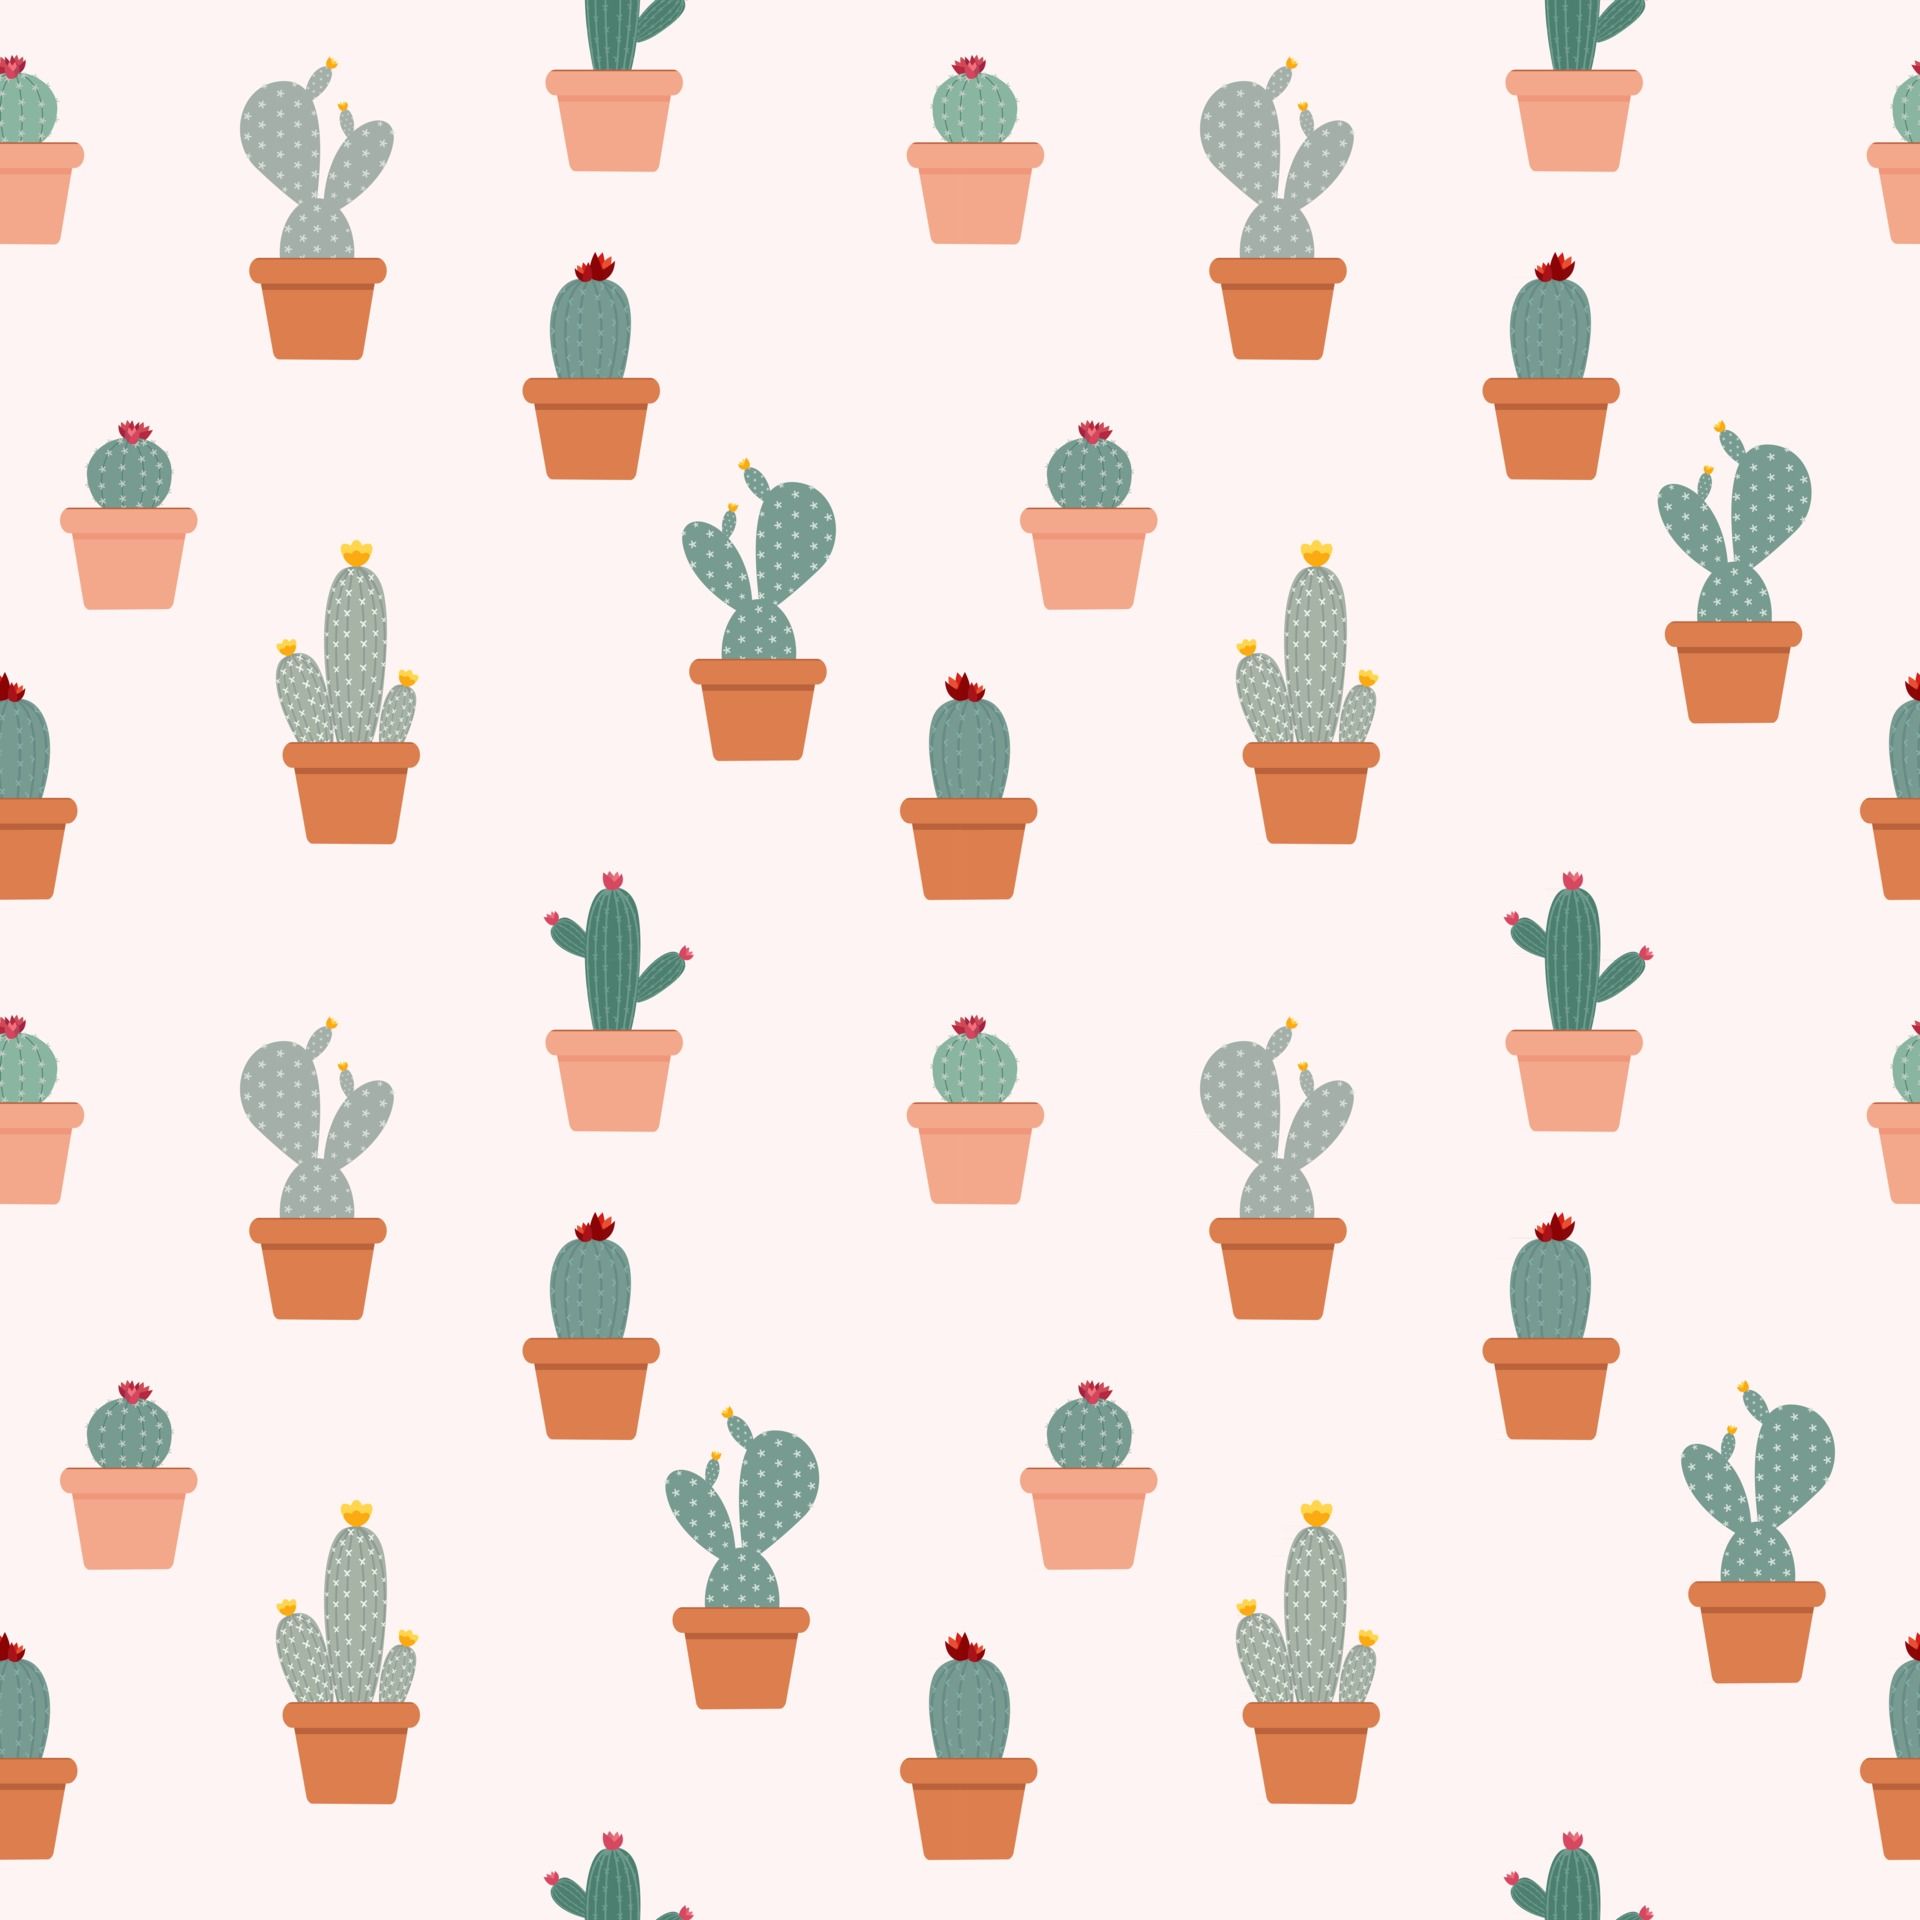 A pattern of cacti in pots - Cactus